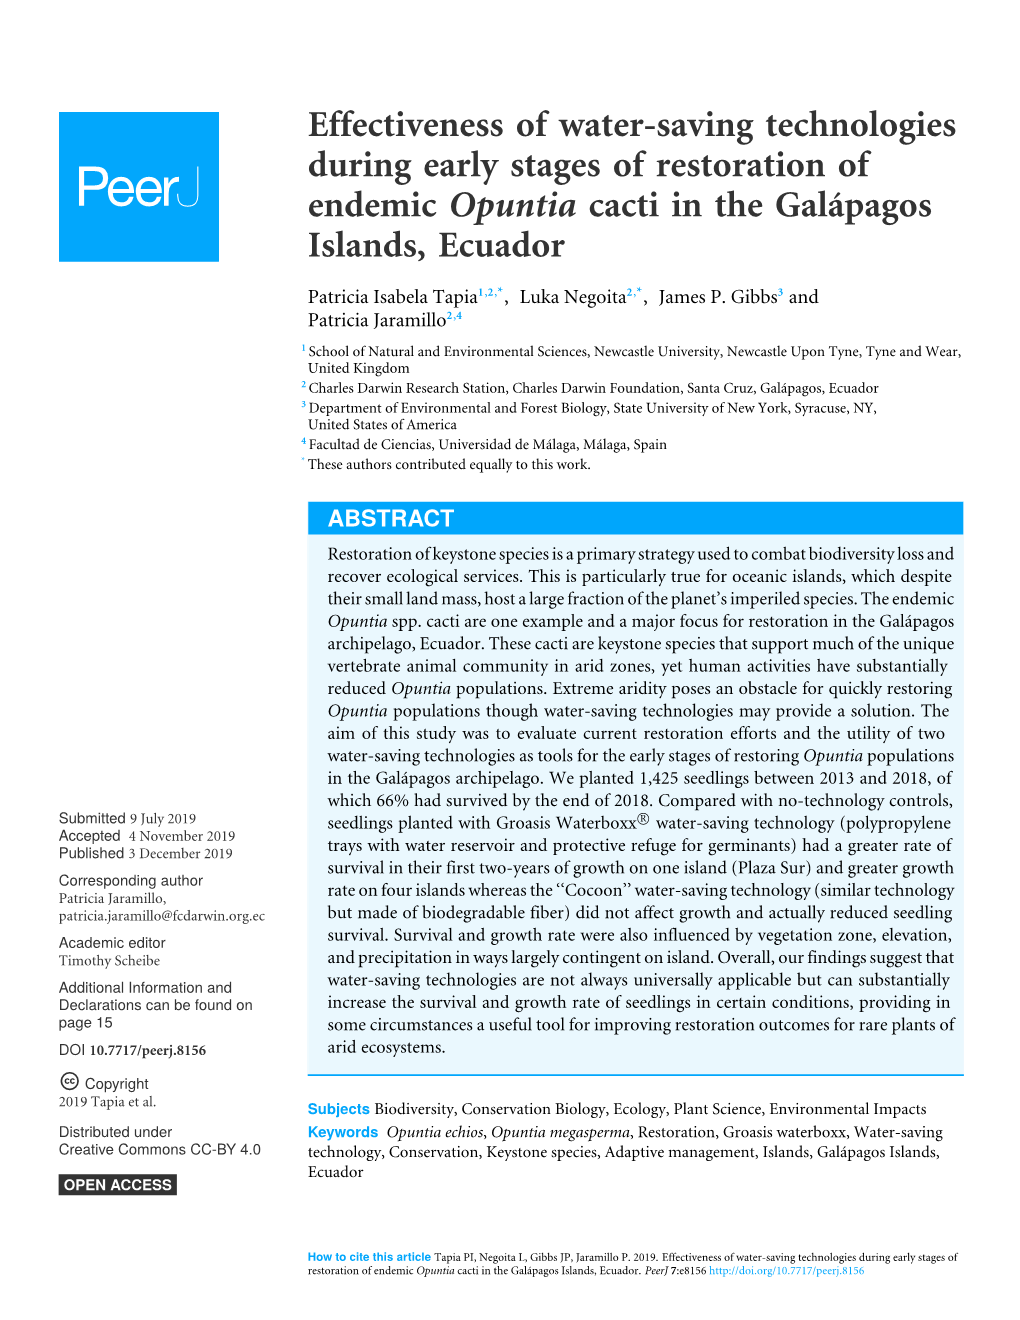 Effectiveness of Water-Saving Technologies During Early Stages of Restoration of Endemic Opuntia Cacti in the Galápagos Islands, Ecuador